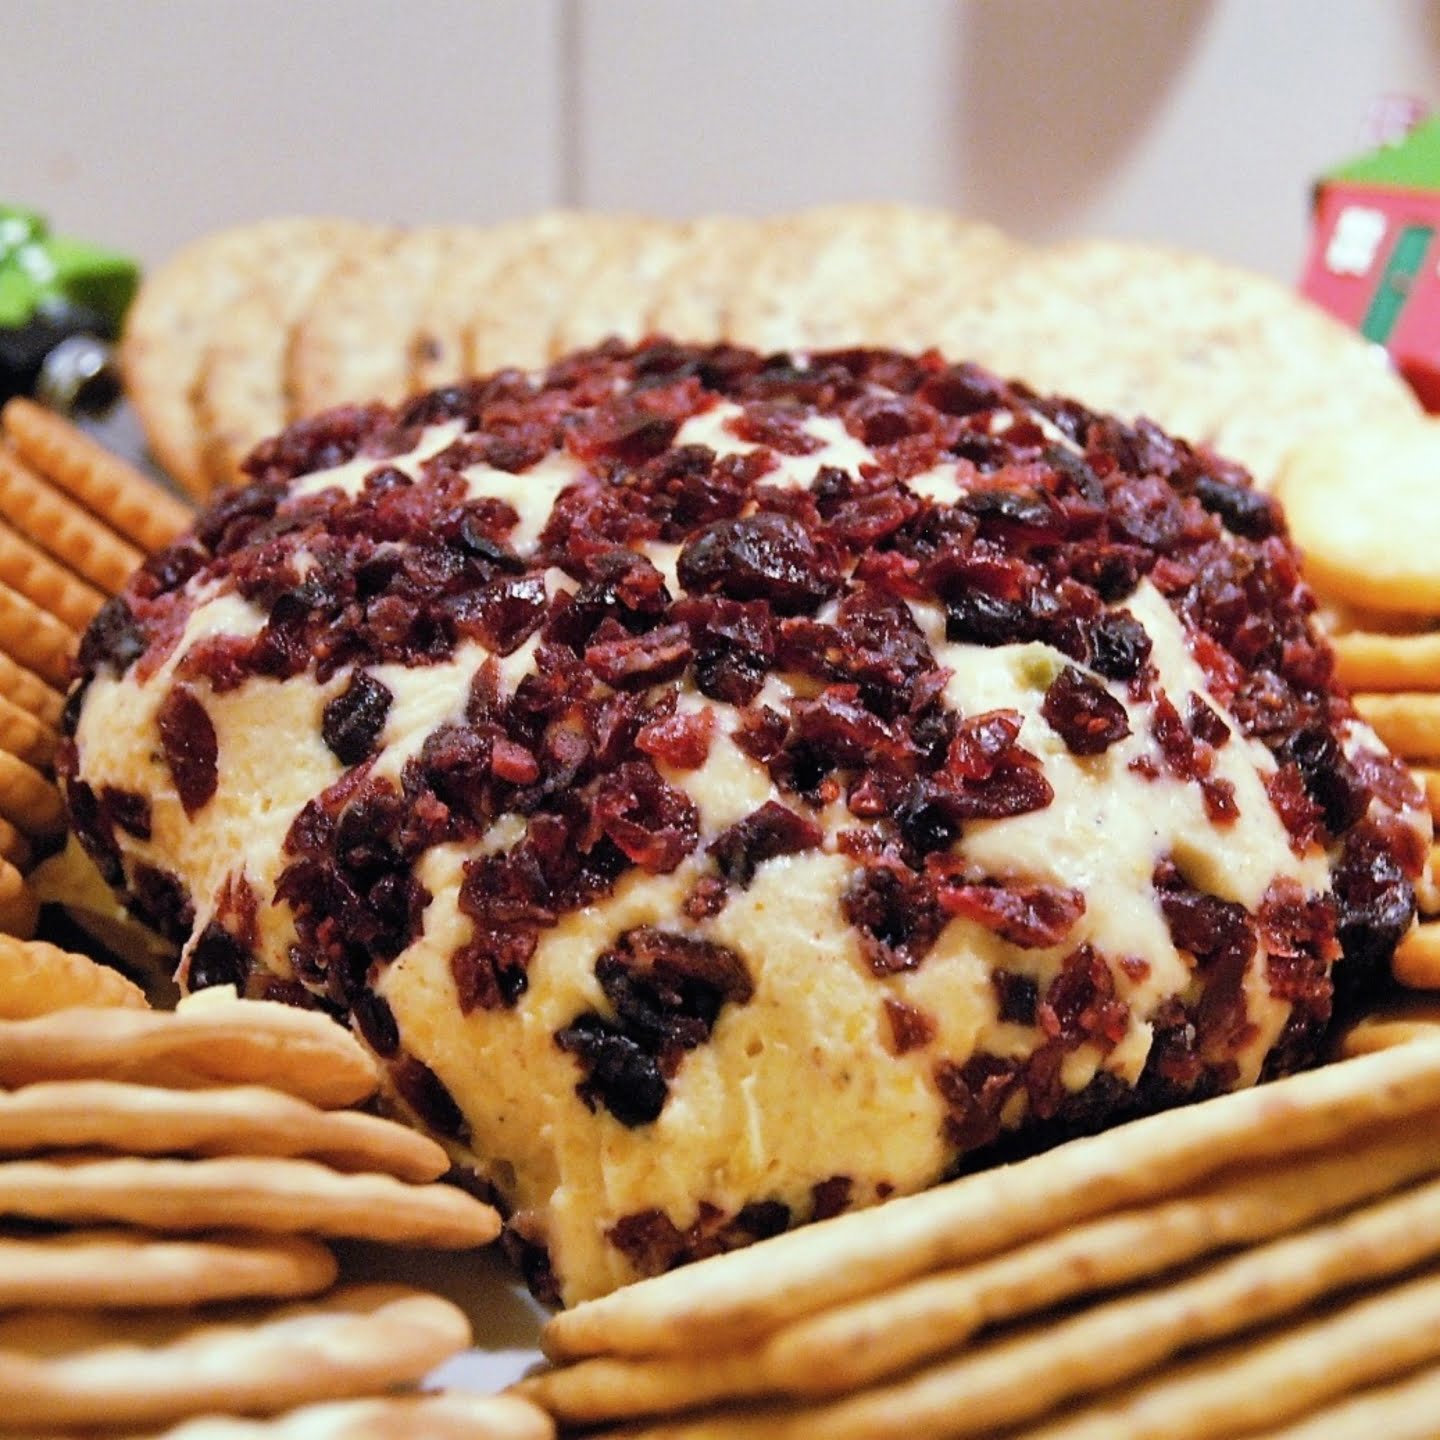 Cheese ball recipe featured